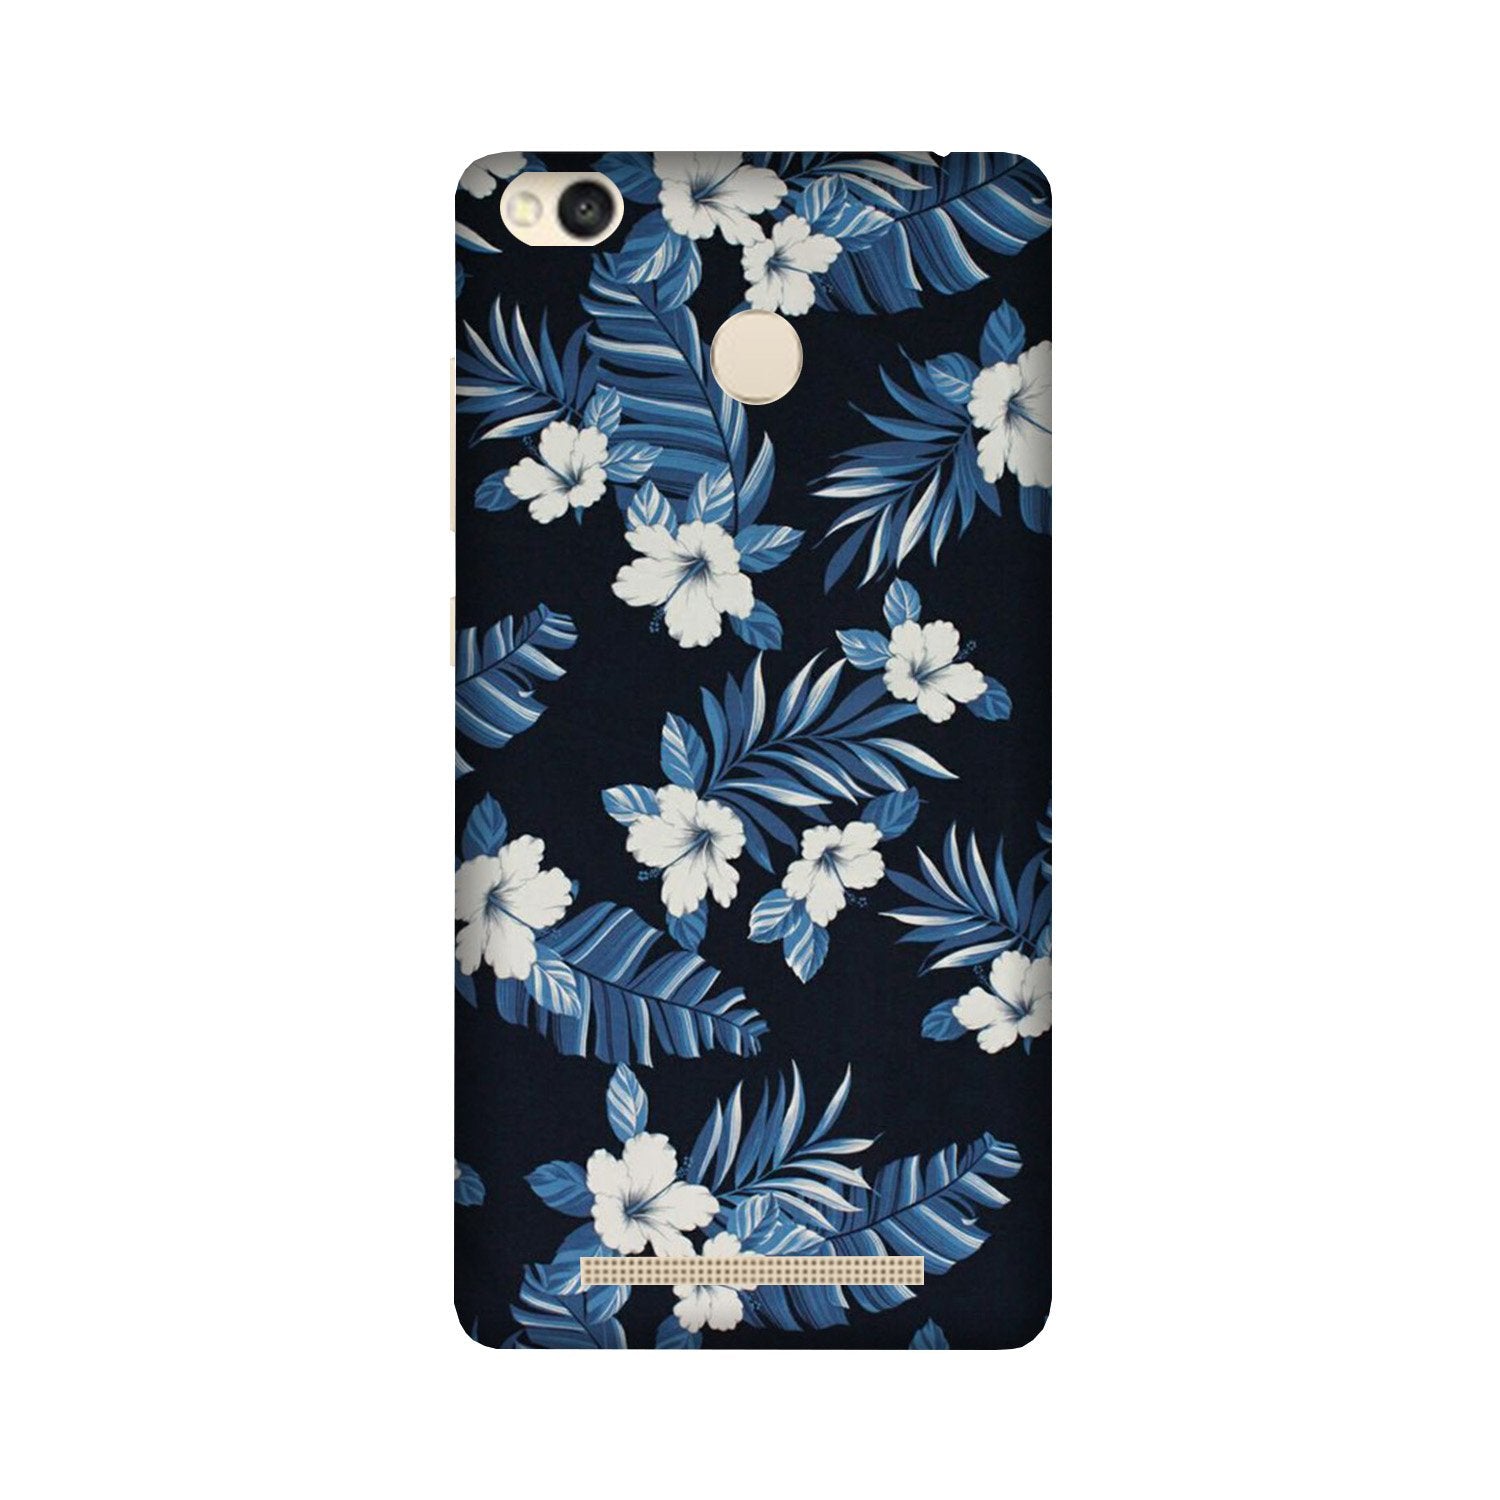 White flowers Blue Background2 Case for Redmi 3S Prime